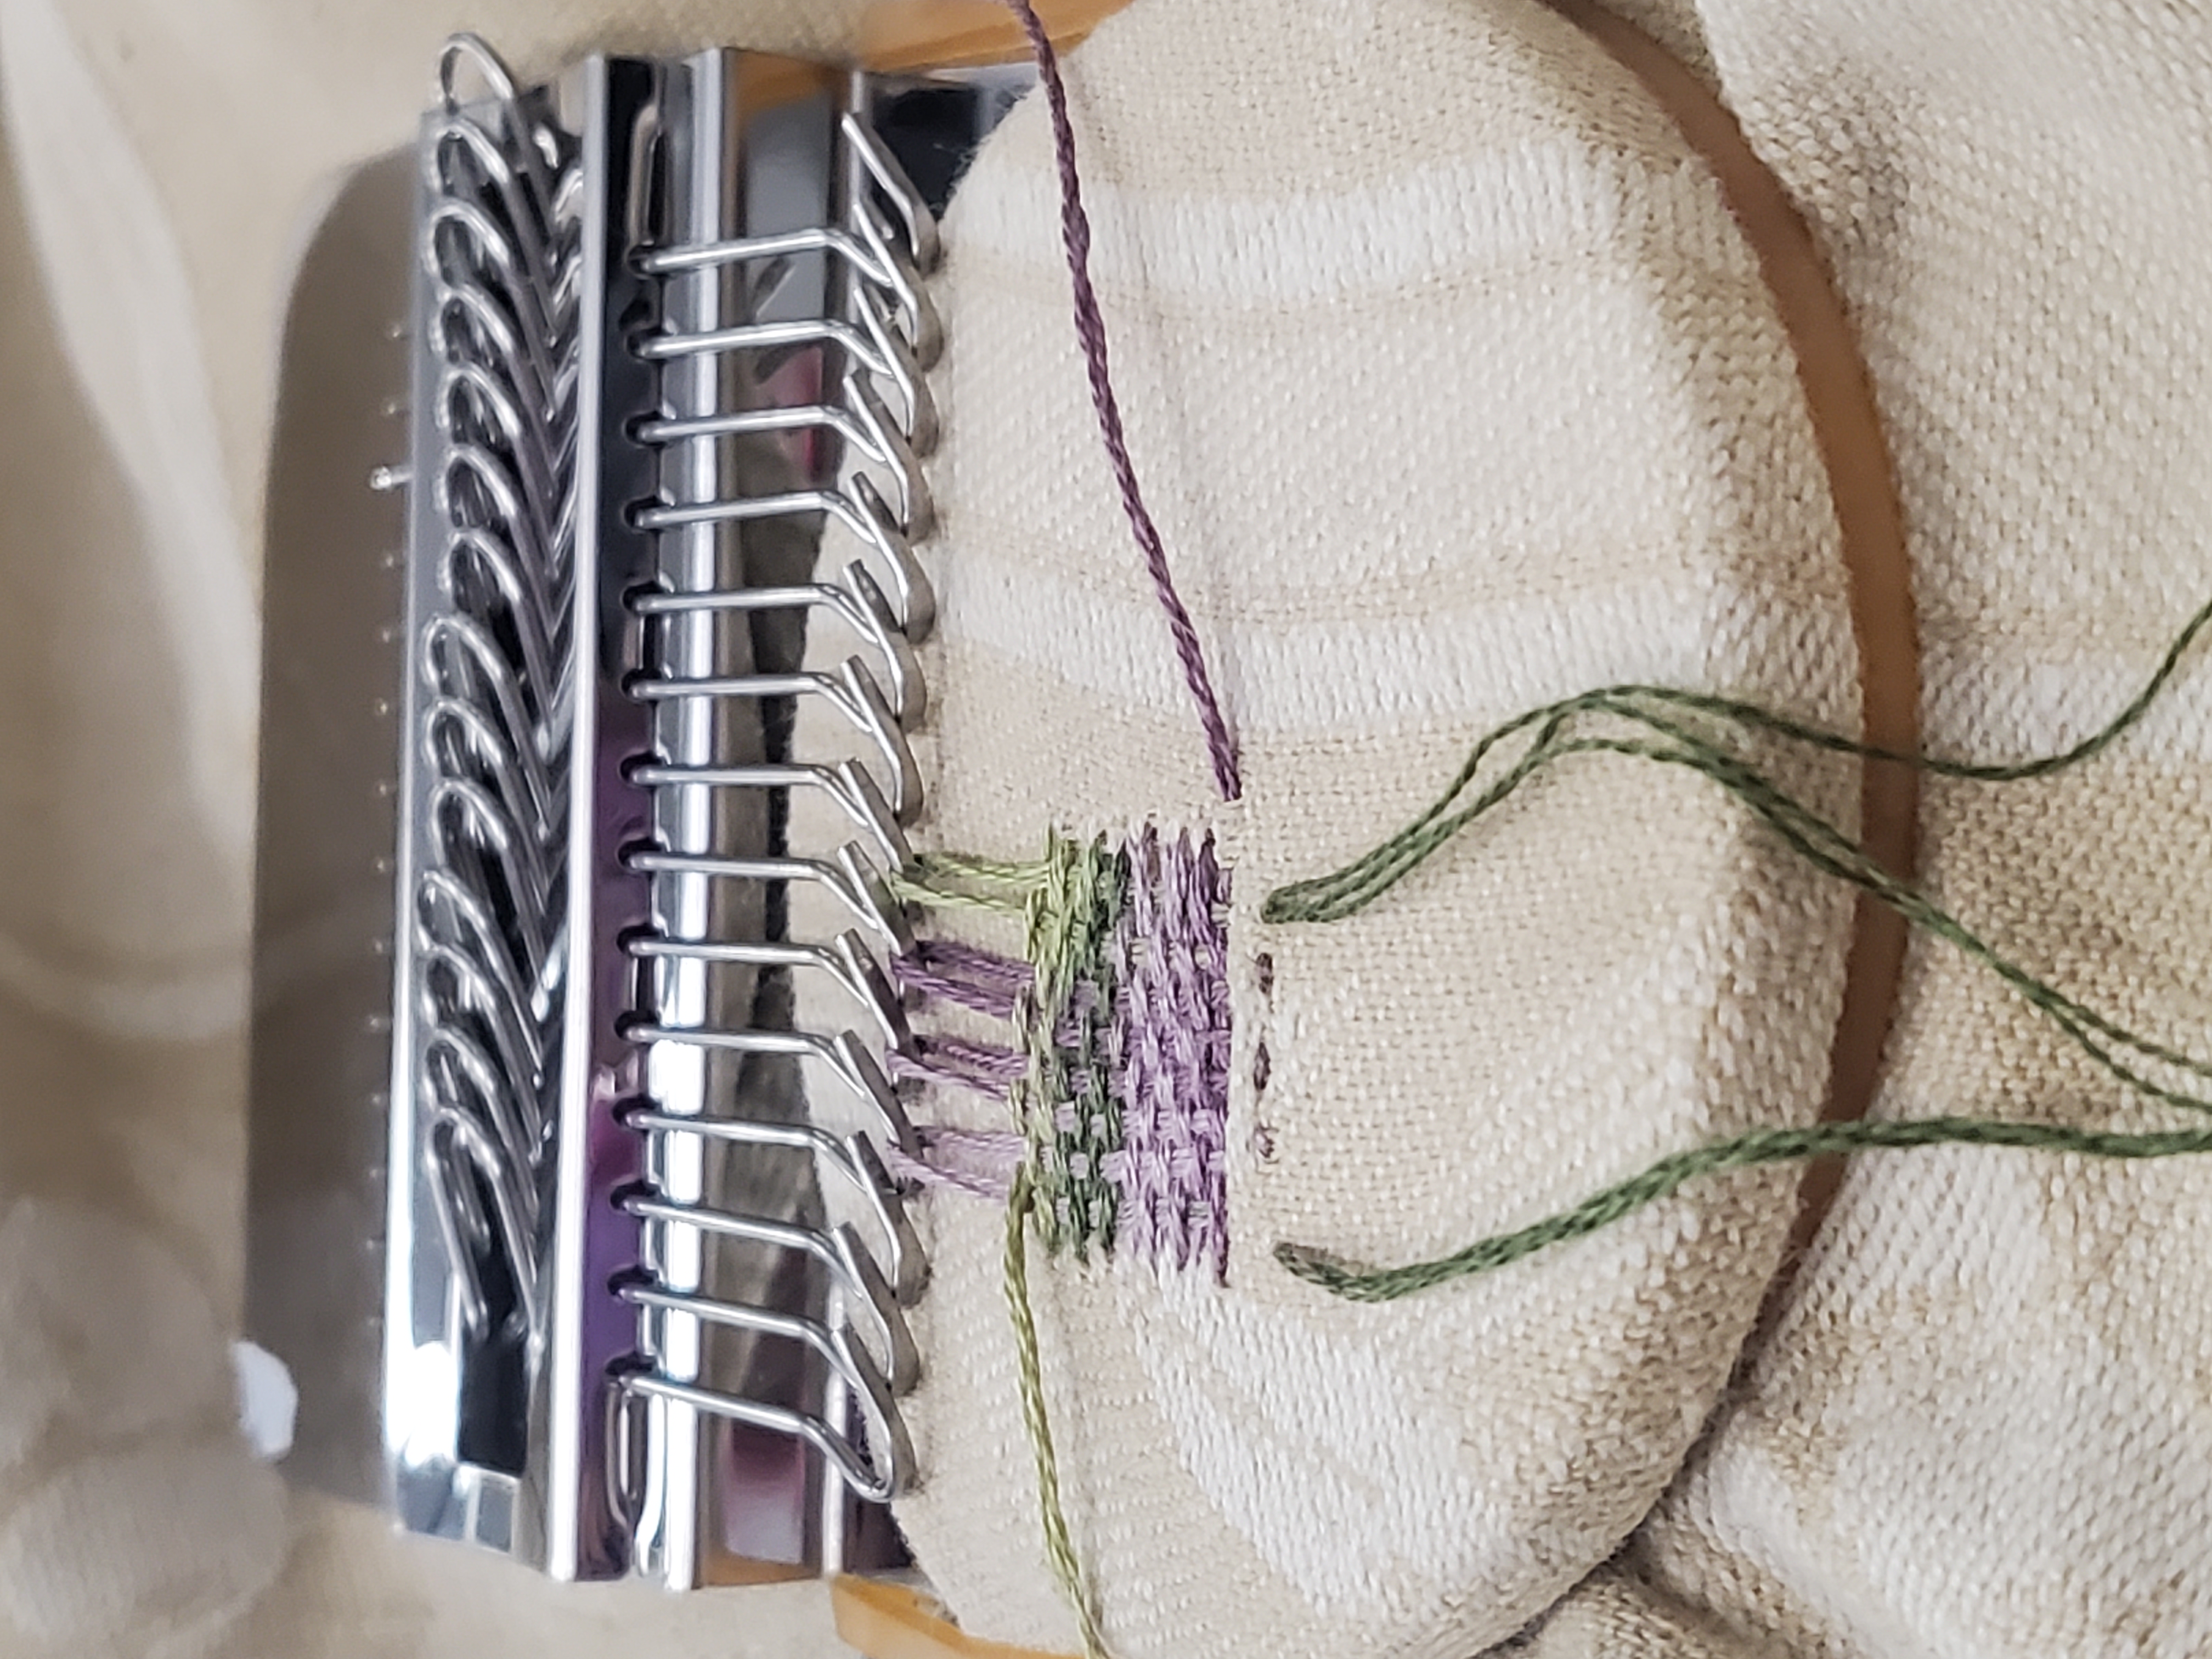 metal darning loom holds green and purple stitches on cream fabric